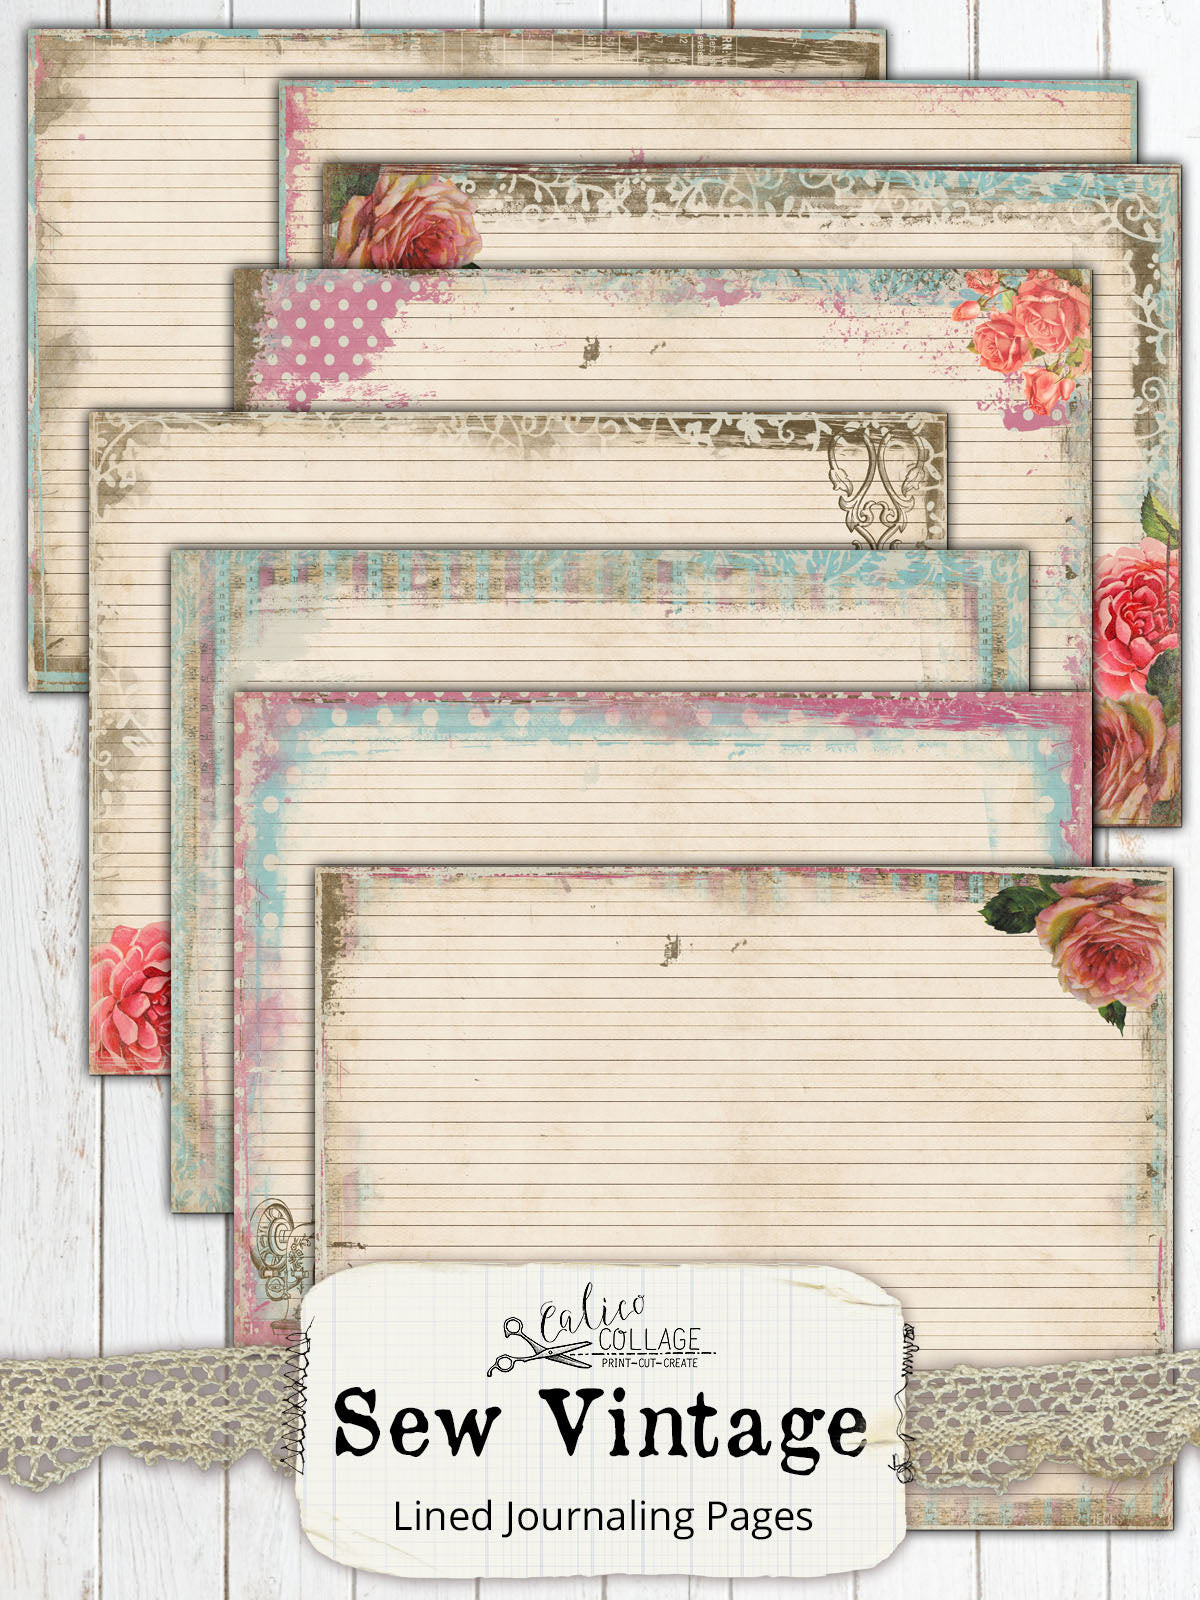 Book Junk Journal Papers, Junk Journal Printable – CalicoCollage